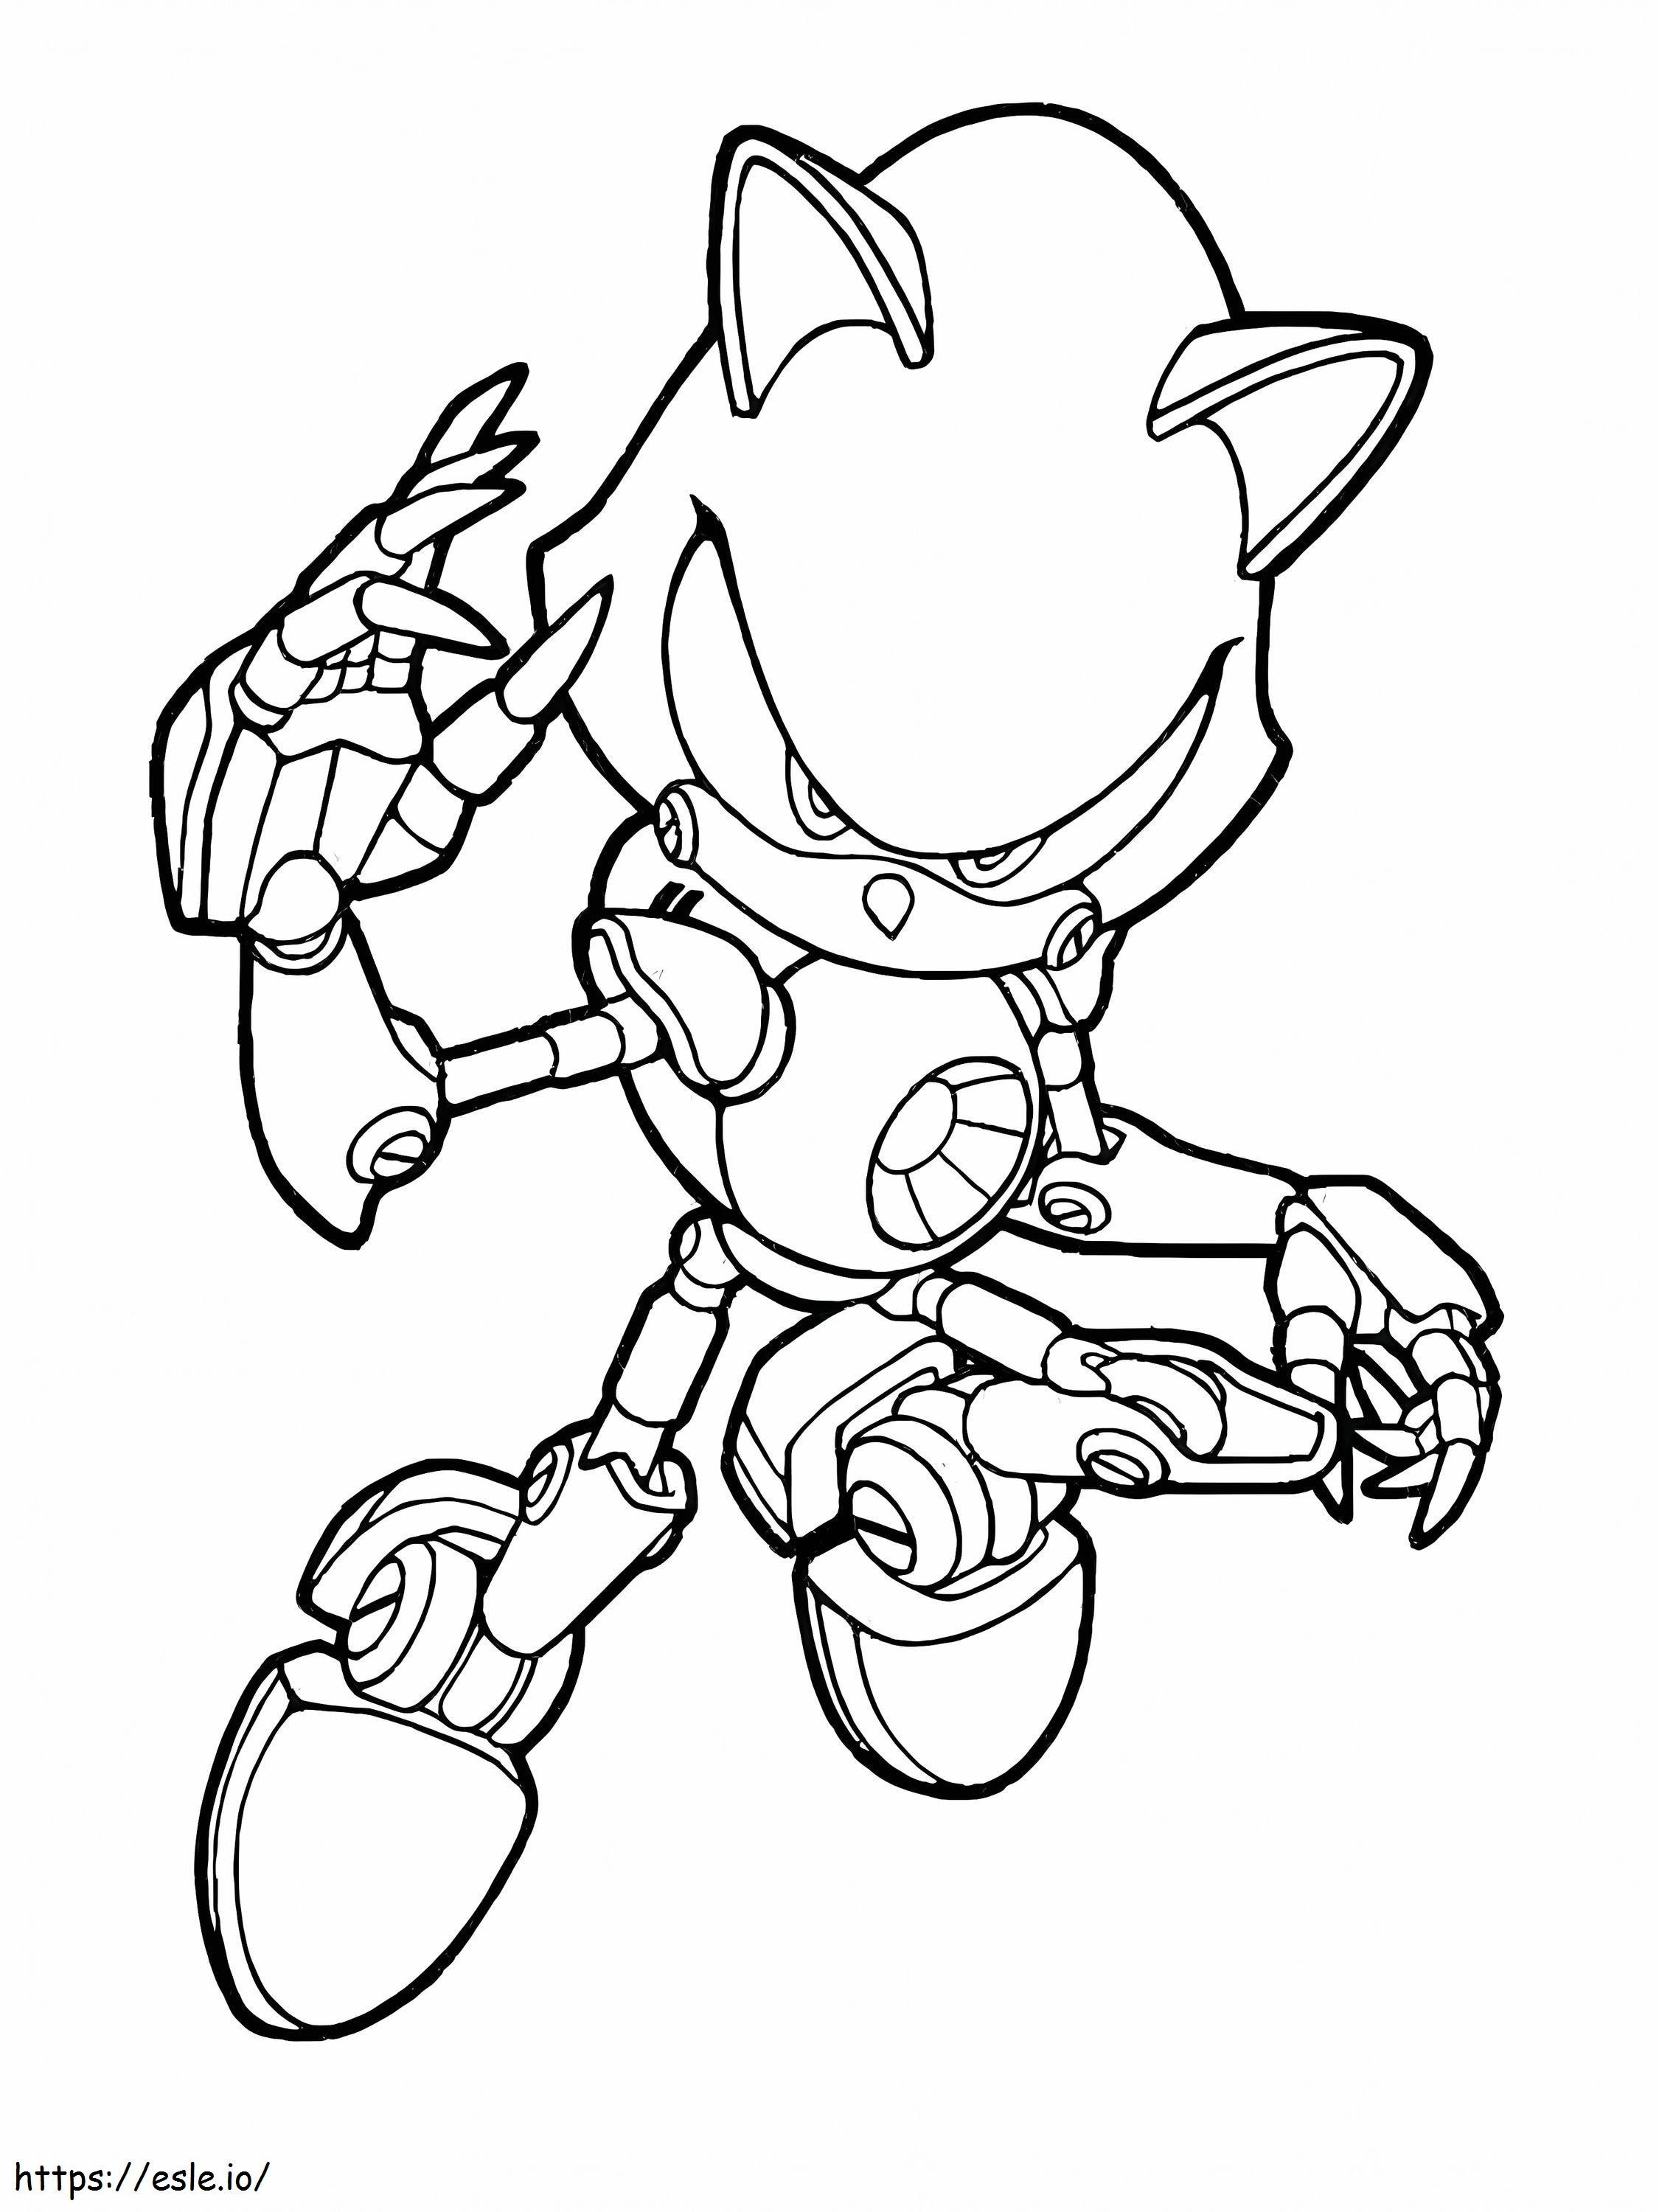 Metal Sonic coloring page